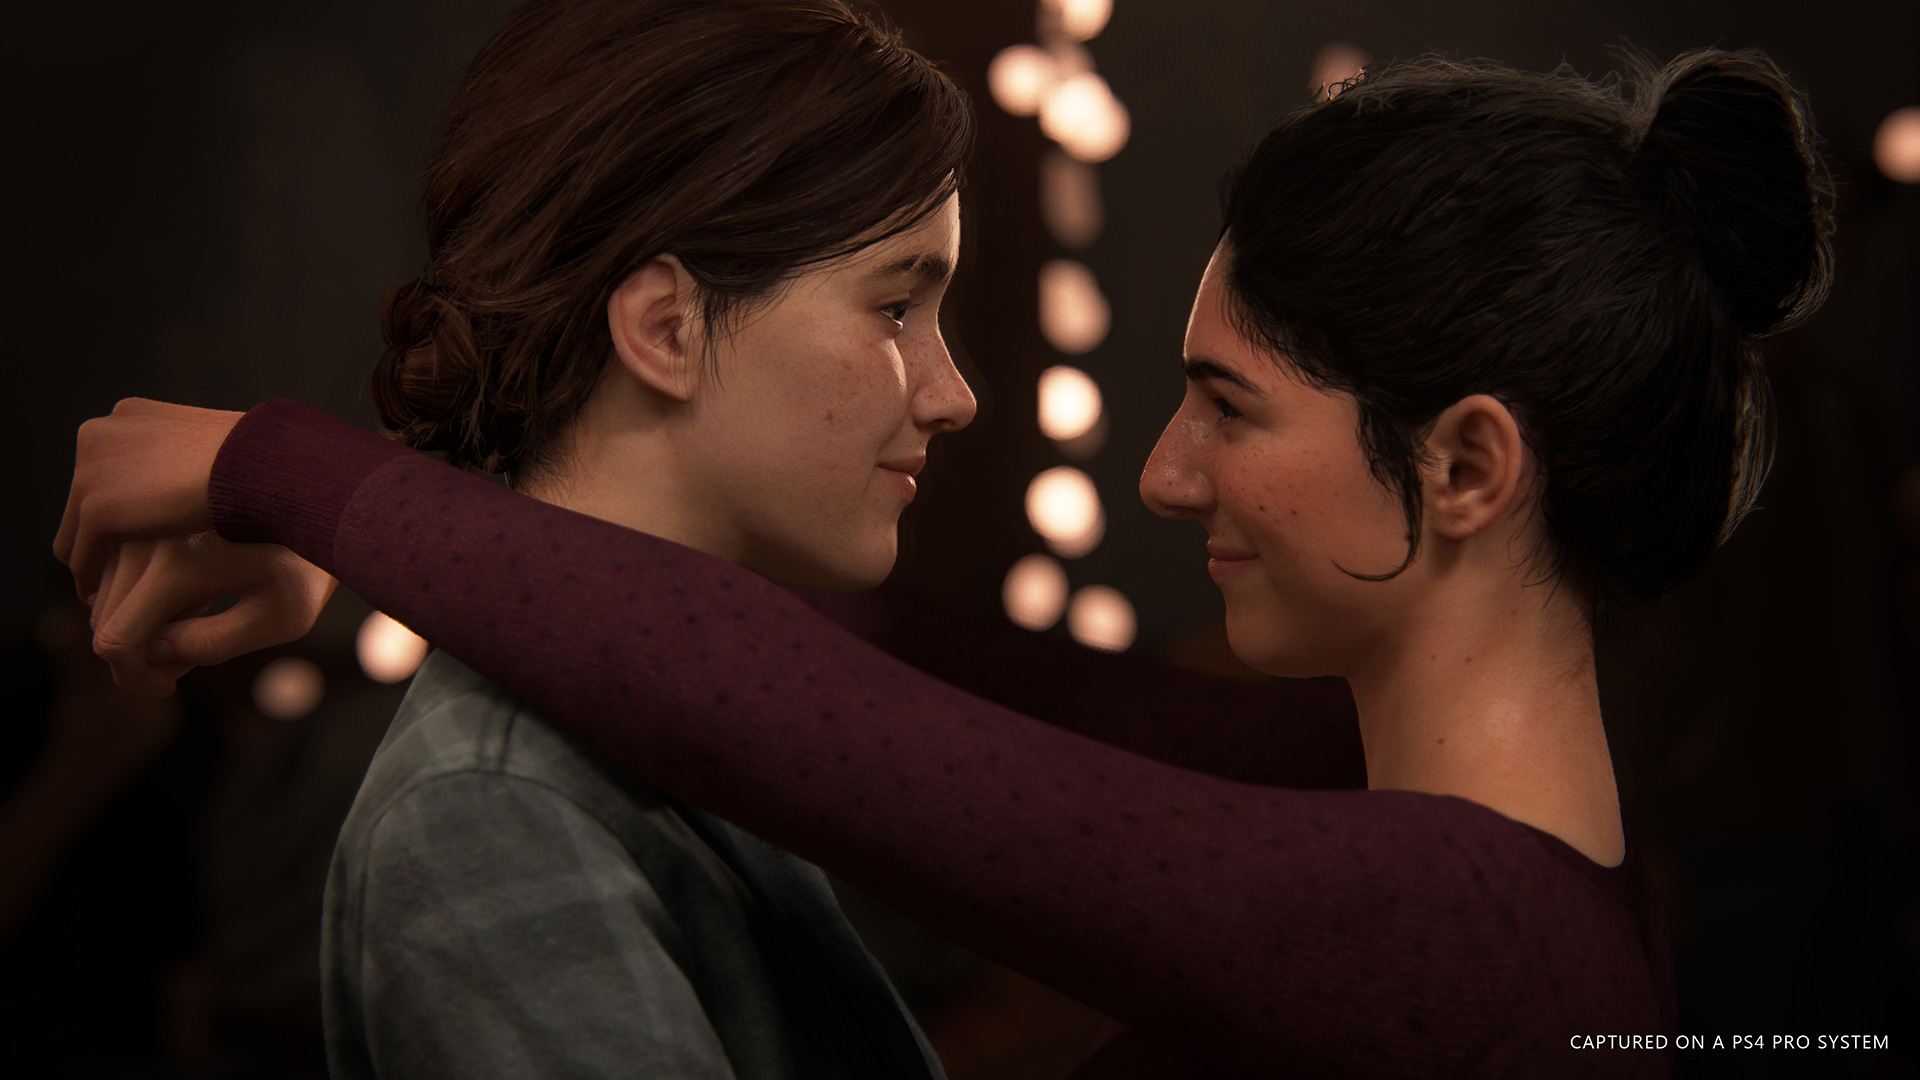 PlayStation on X: Ellie and Joel's story continues in The Last of Us Part  II. Watch the intense new story trailer:  Out June  19 on PS4  / X